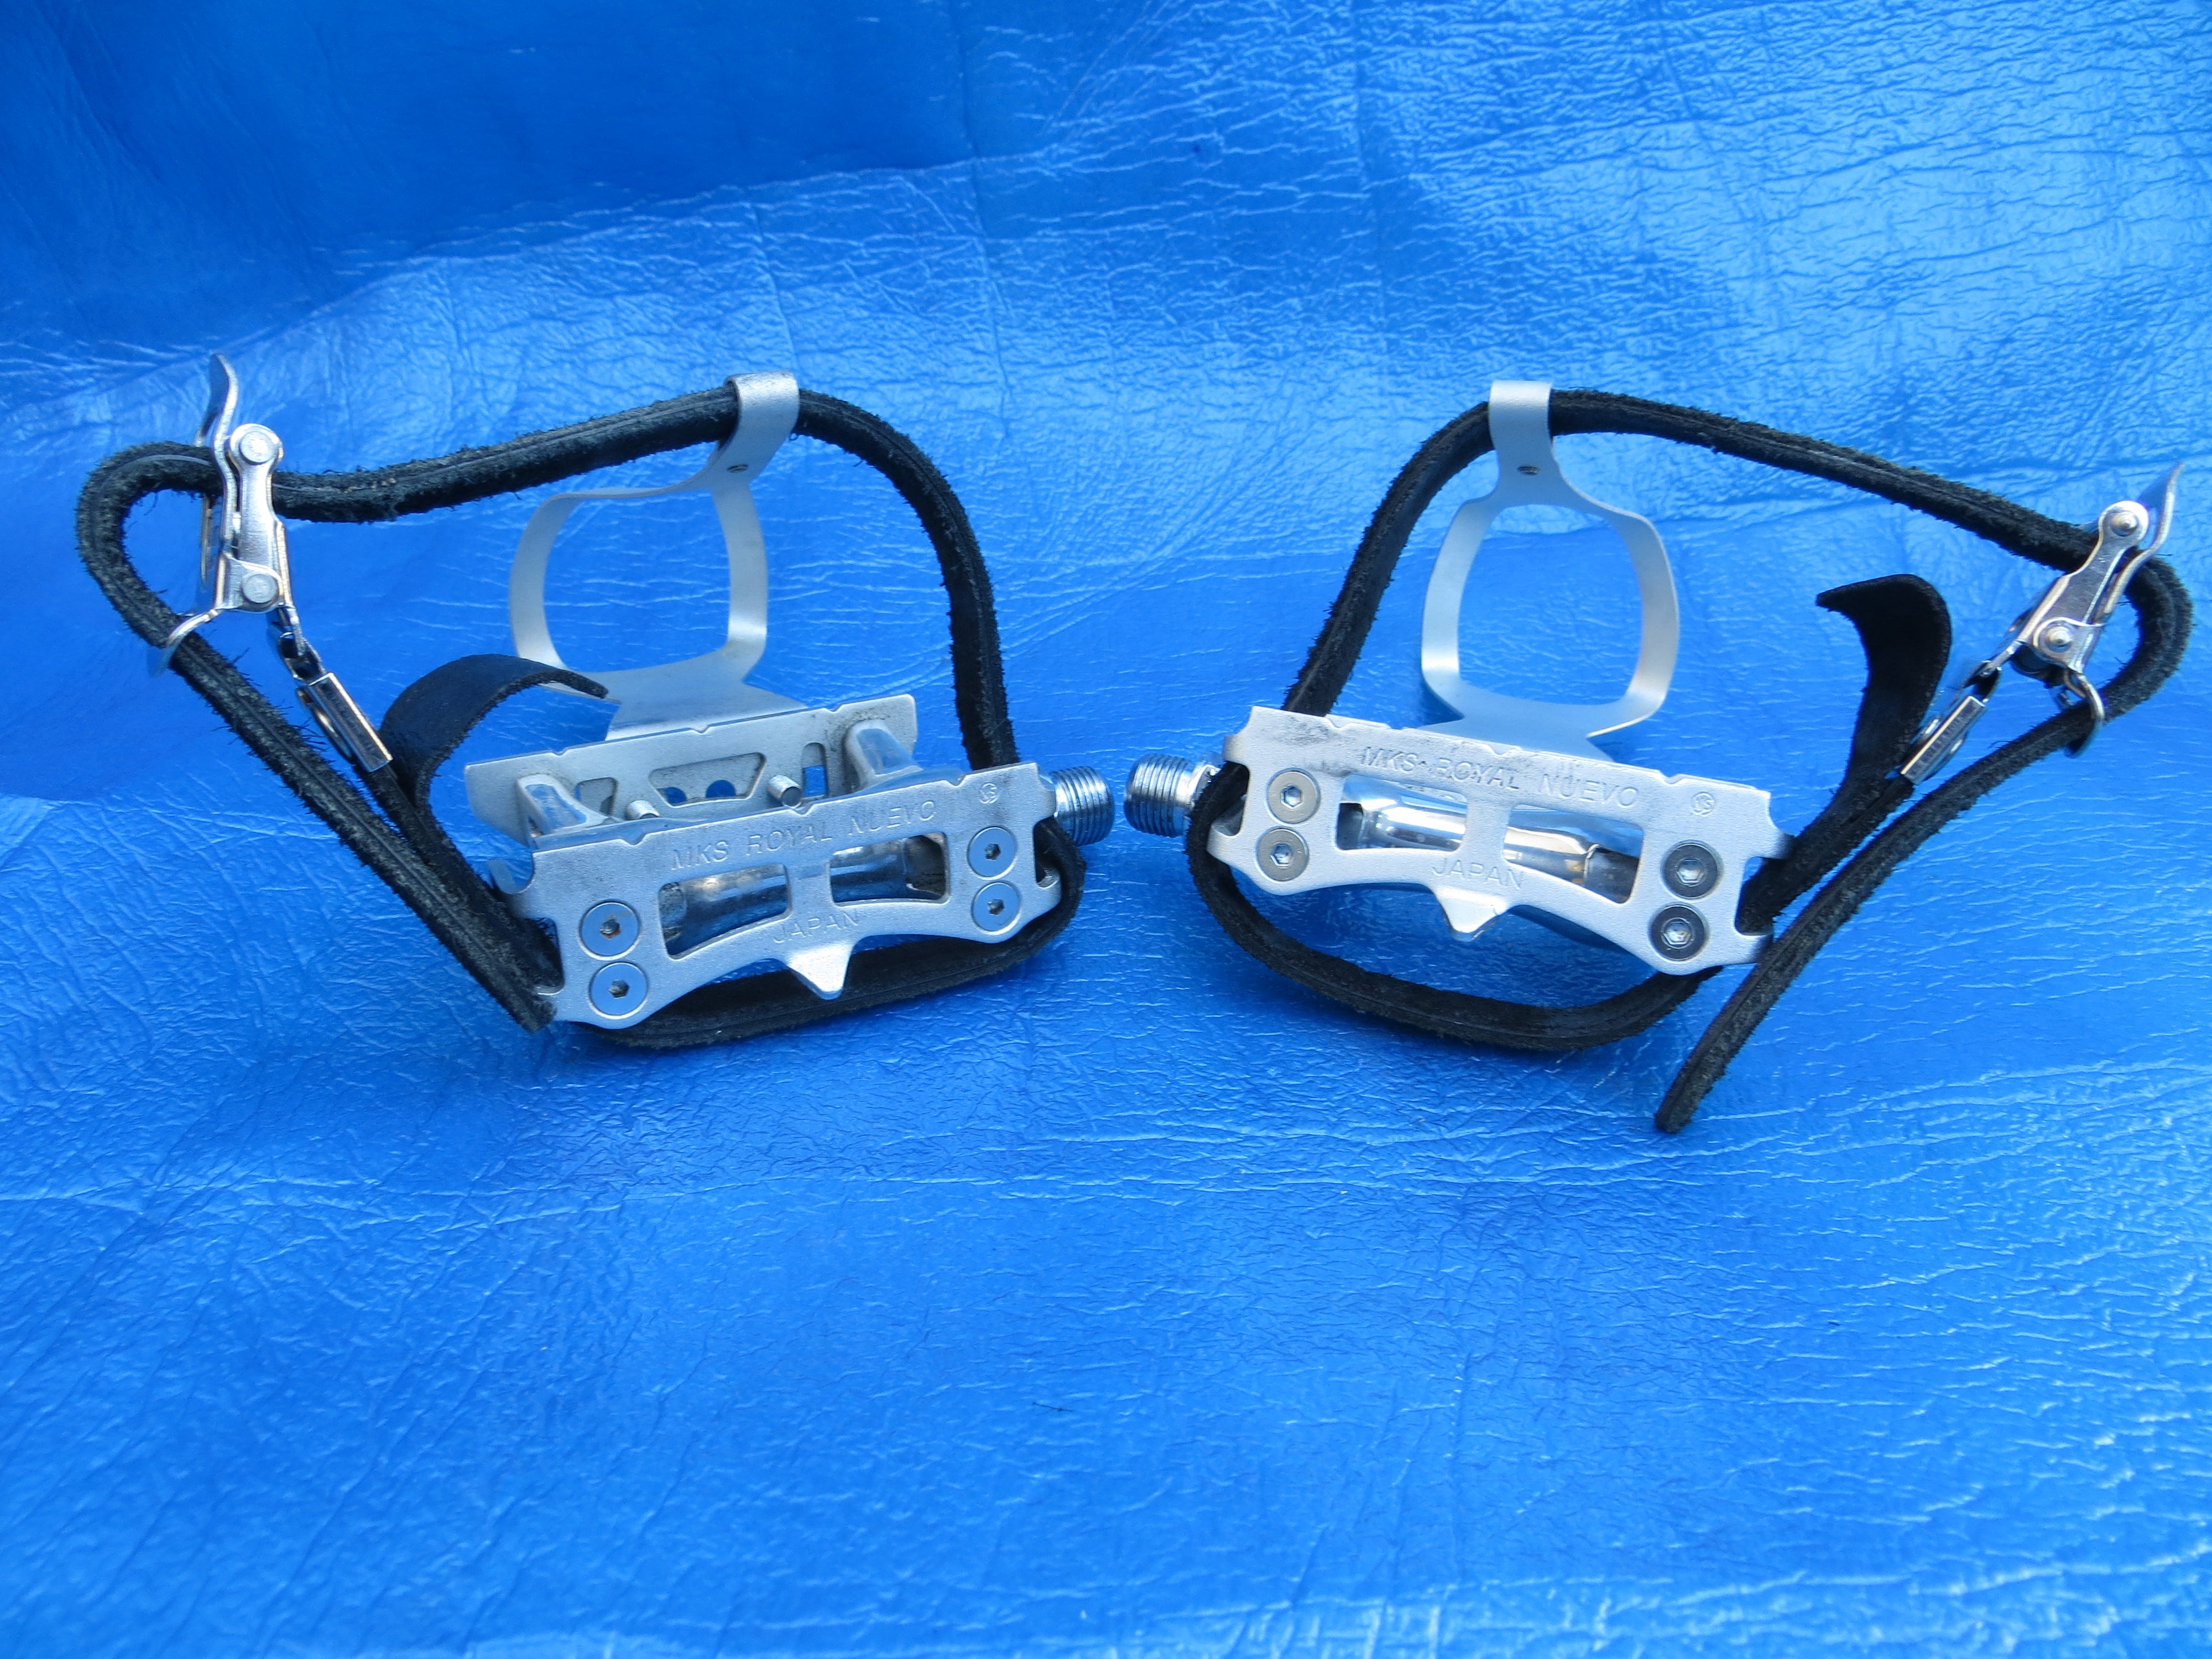 MKS Royal Nuevo NJS Pedals , MKS M-size NJS AA Clips and MKS Fit-alfa NJS Toe Straps (24012922)